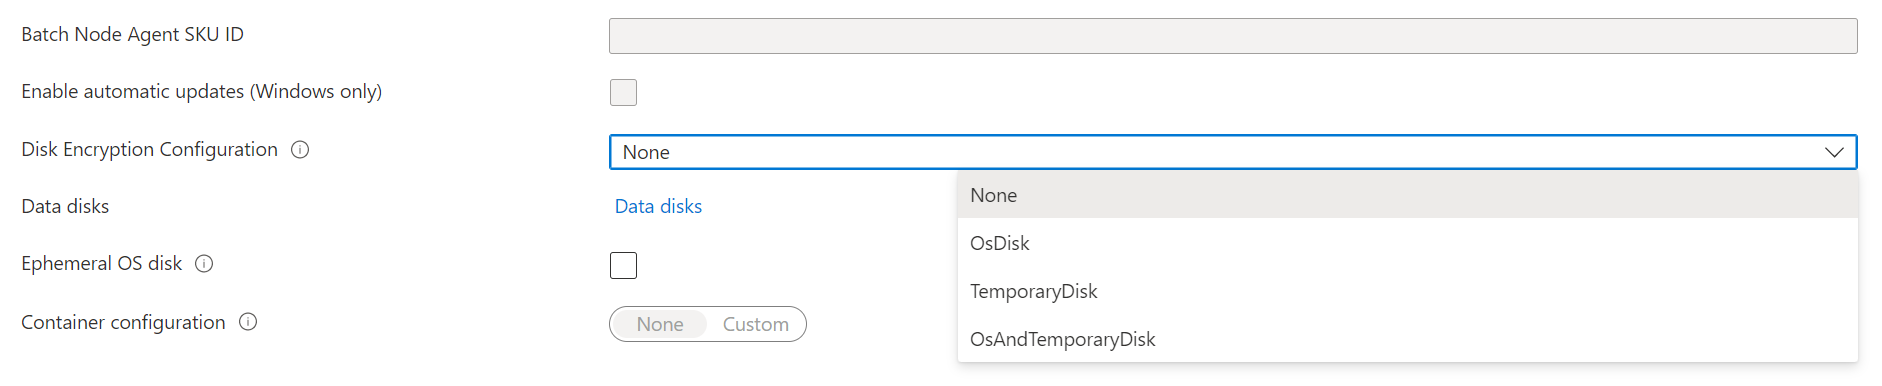 Screenshot of the Disk Encryption Configuration option in the Azure portal.